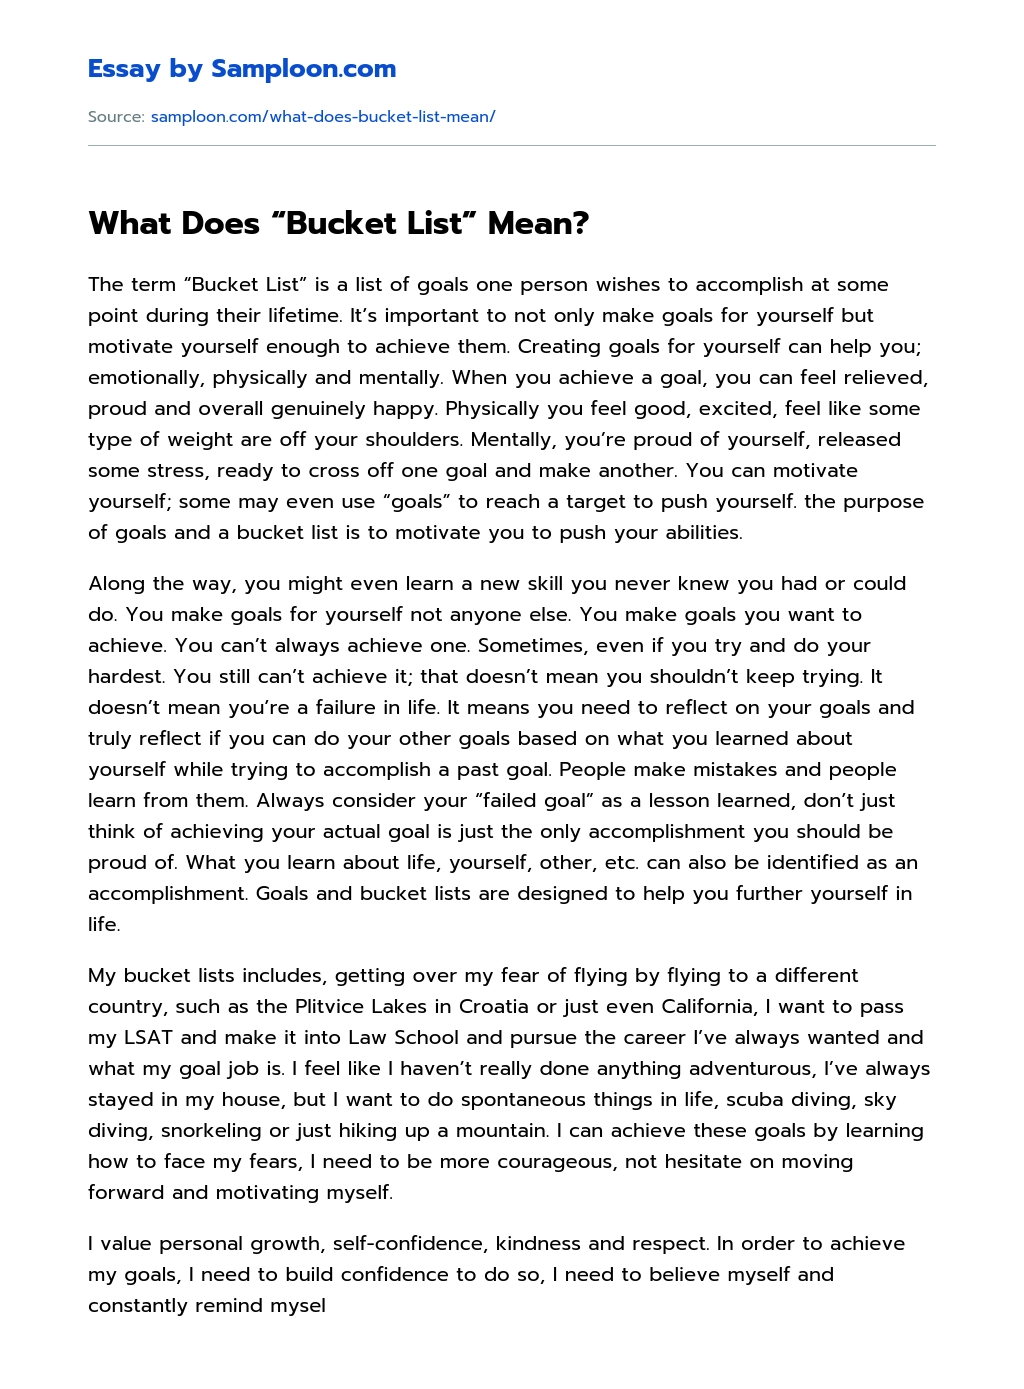 What Does “Bucket List” Mean? essay